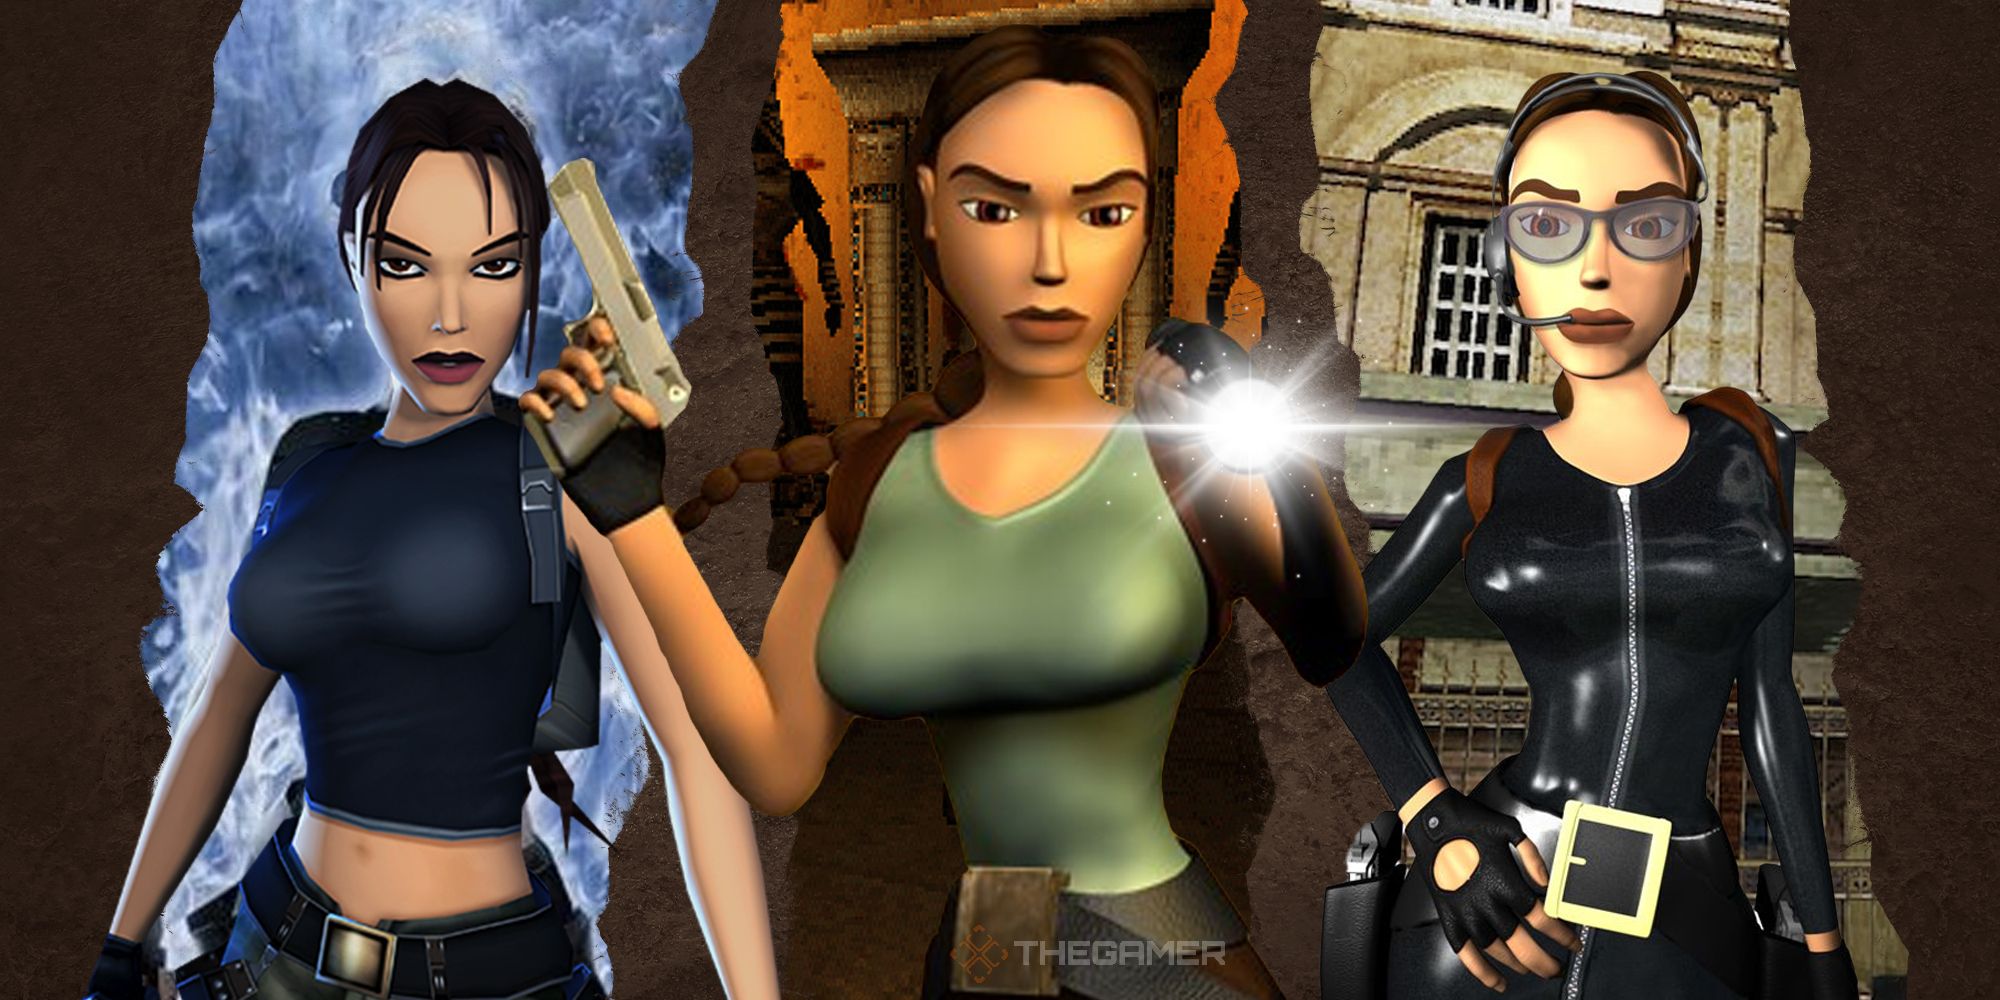 A collage of what Lara looked like in Tomb Raider 4-6